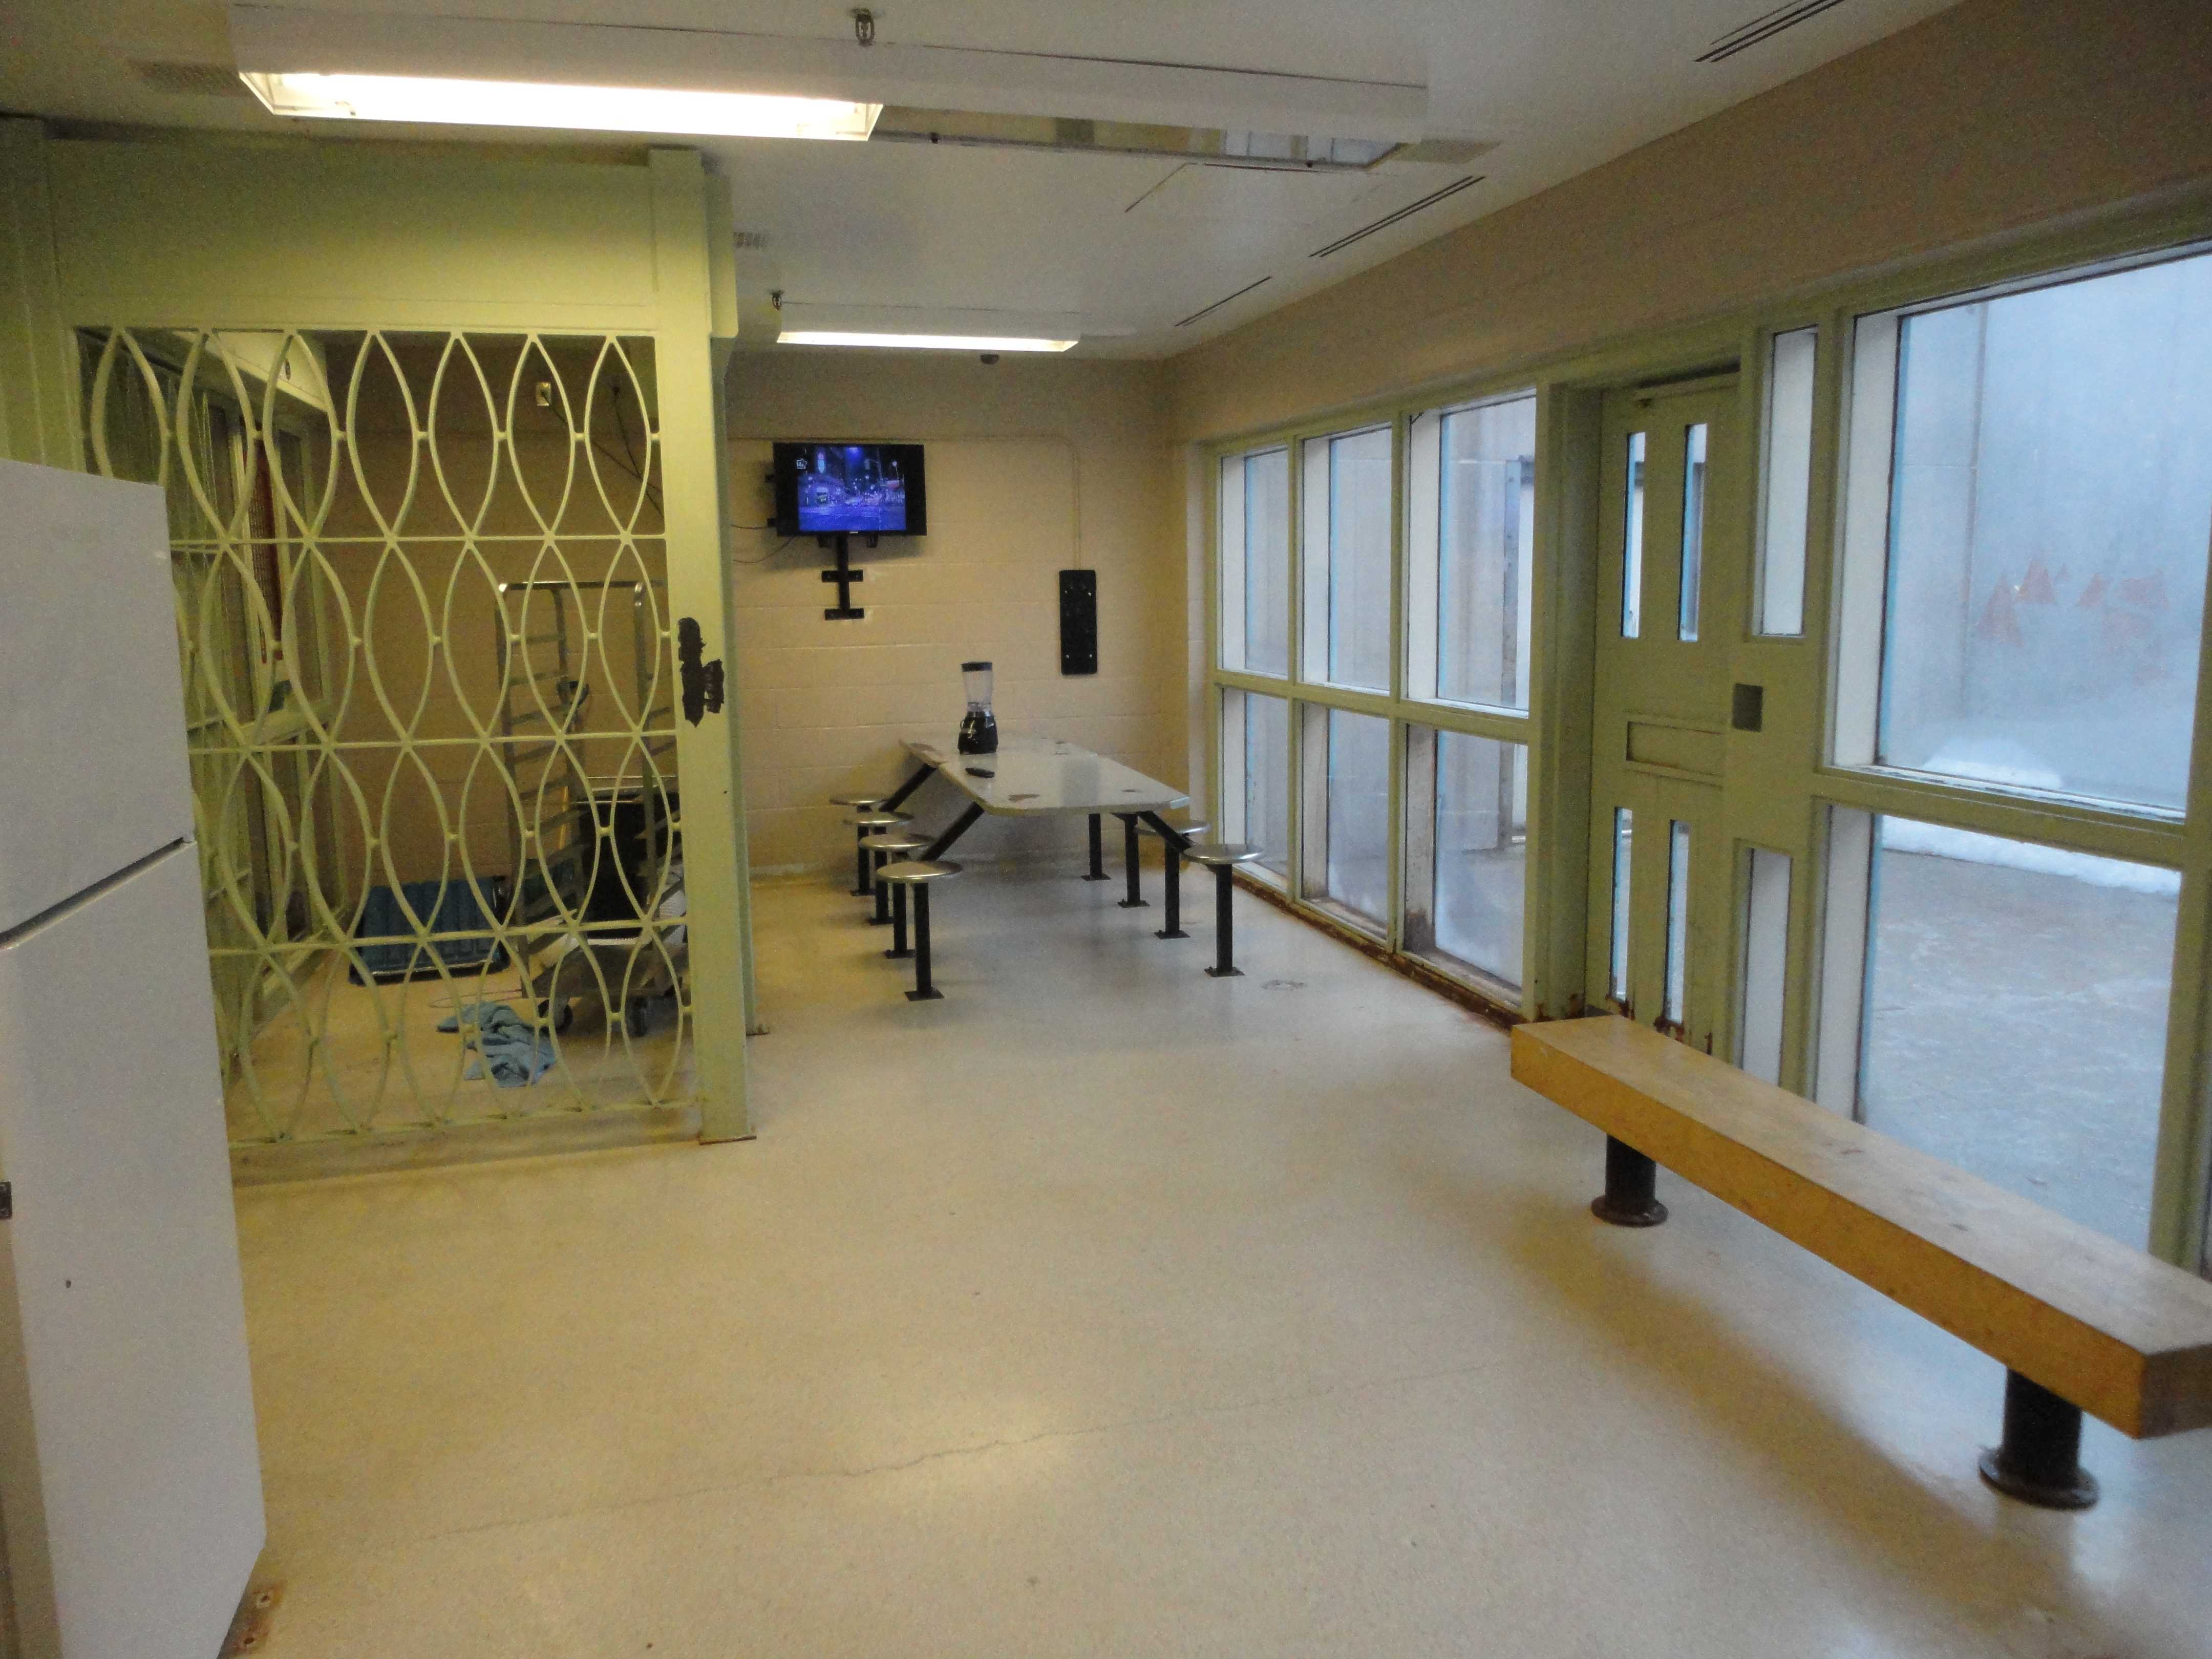 Photo of the common room in the Therapeutic Range at Atlantic Institution